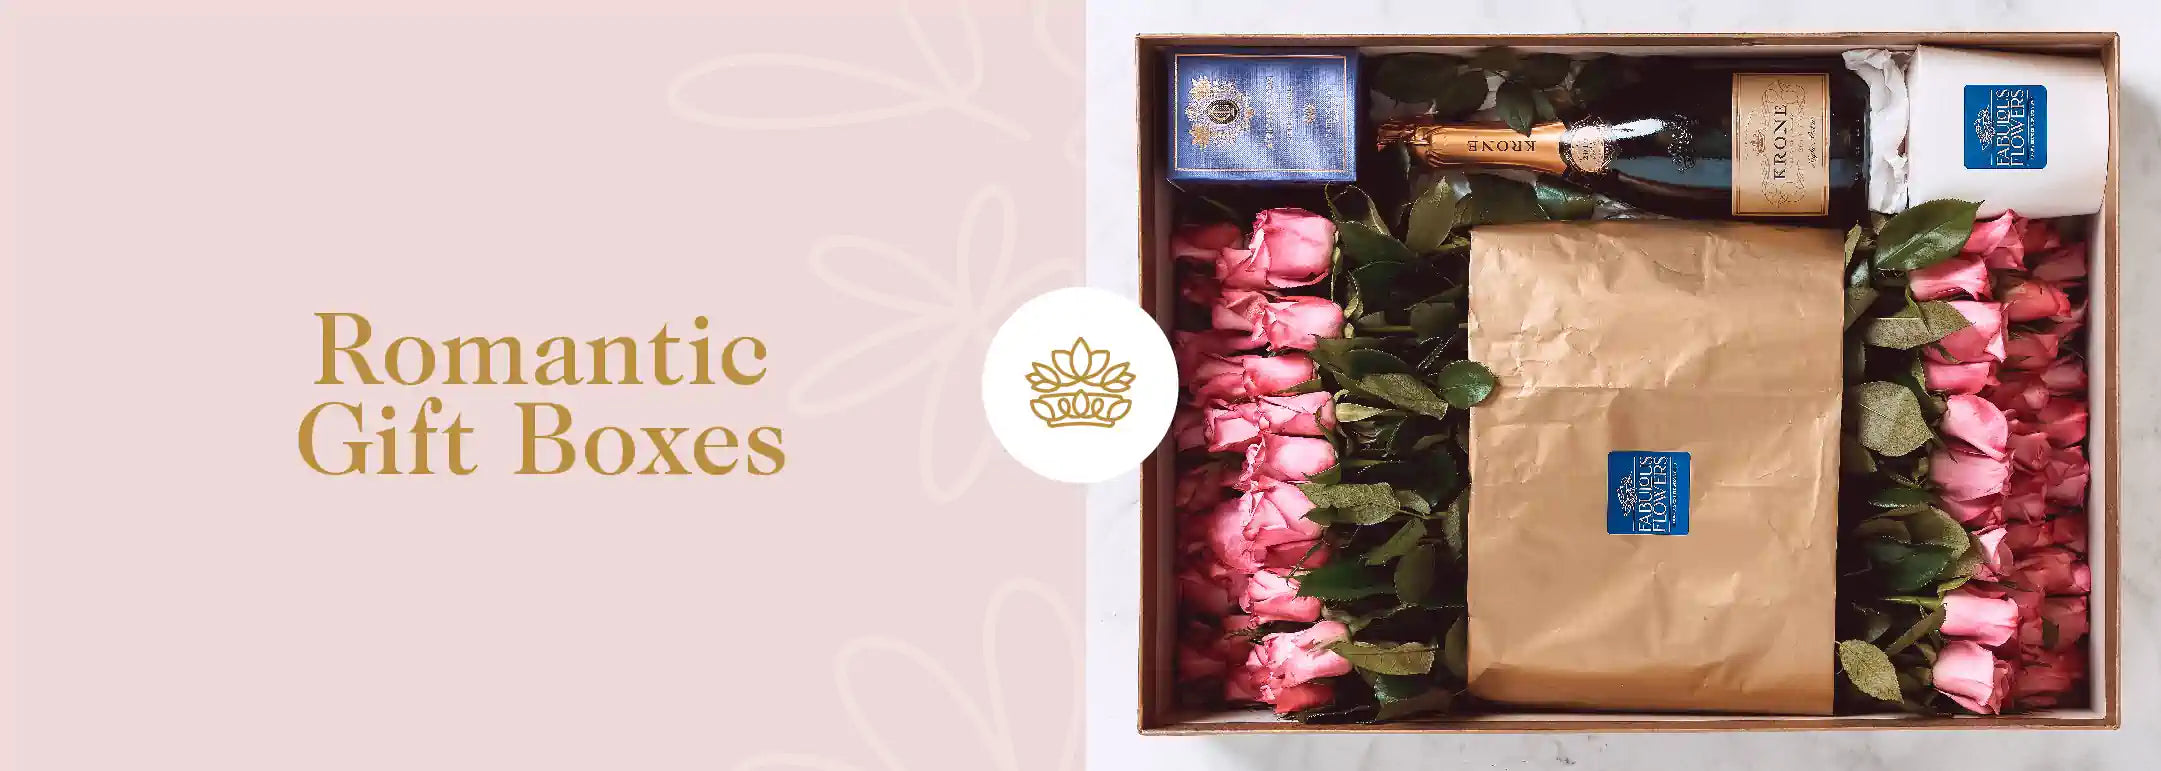 A gift box filled with pink roses, champagne, and other romantic items. Fabulous Flowers and Gifts - Romantic Gift Boxes